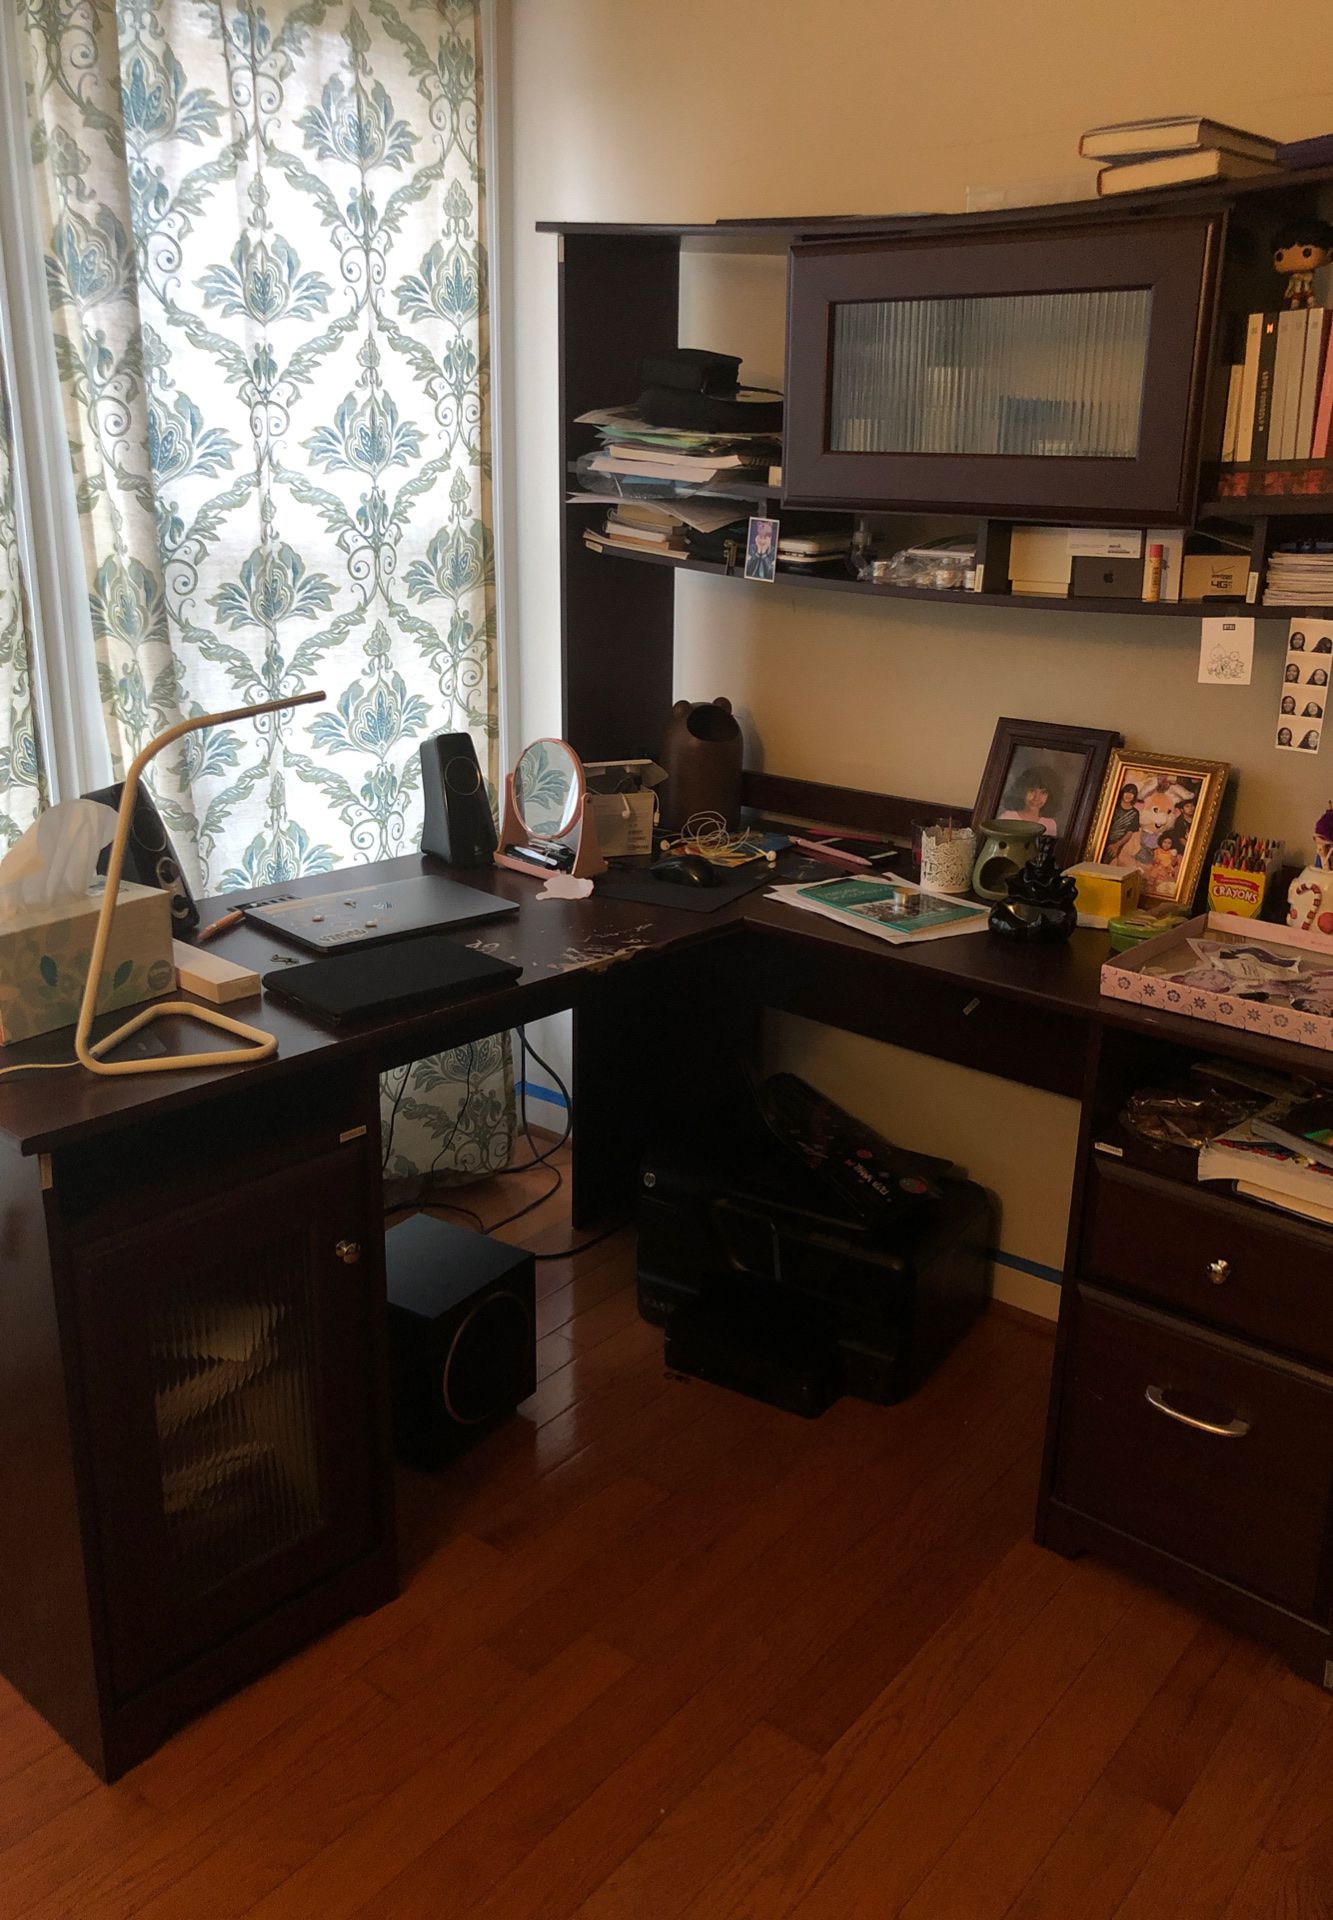 Large desk with hutch